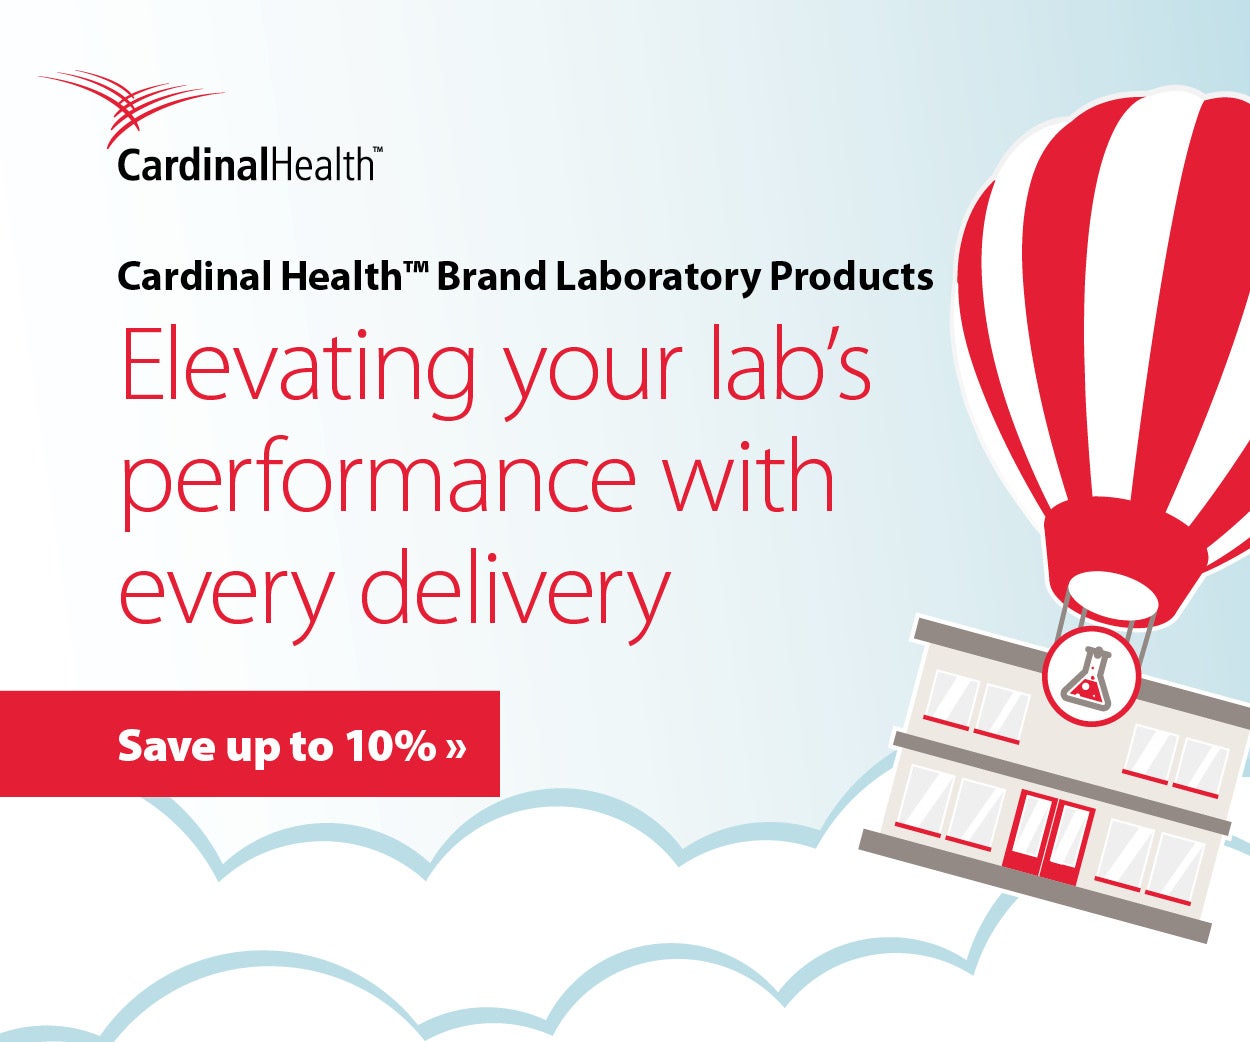 Cardinal Health Brand Laboratory Products - Elevating your lab's performance with every delivery: Save up to 10%